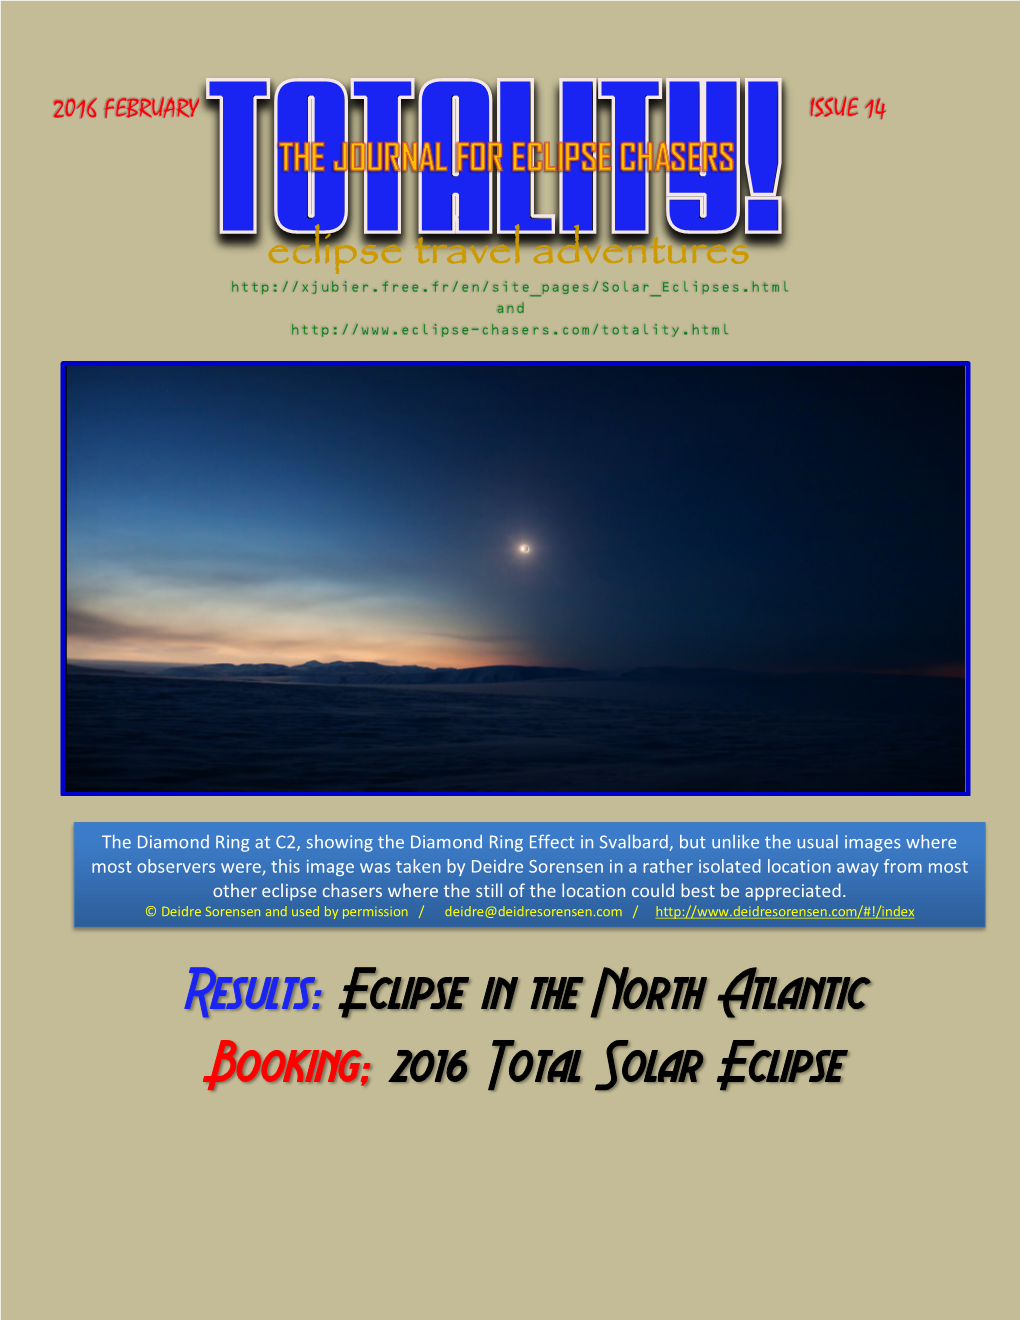 TOTALITY! Eclipse Travel Adventures